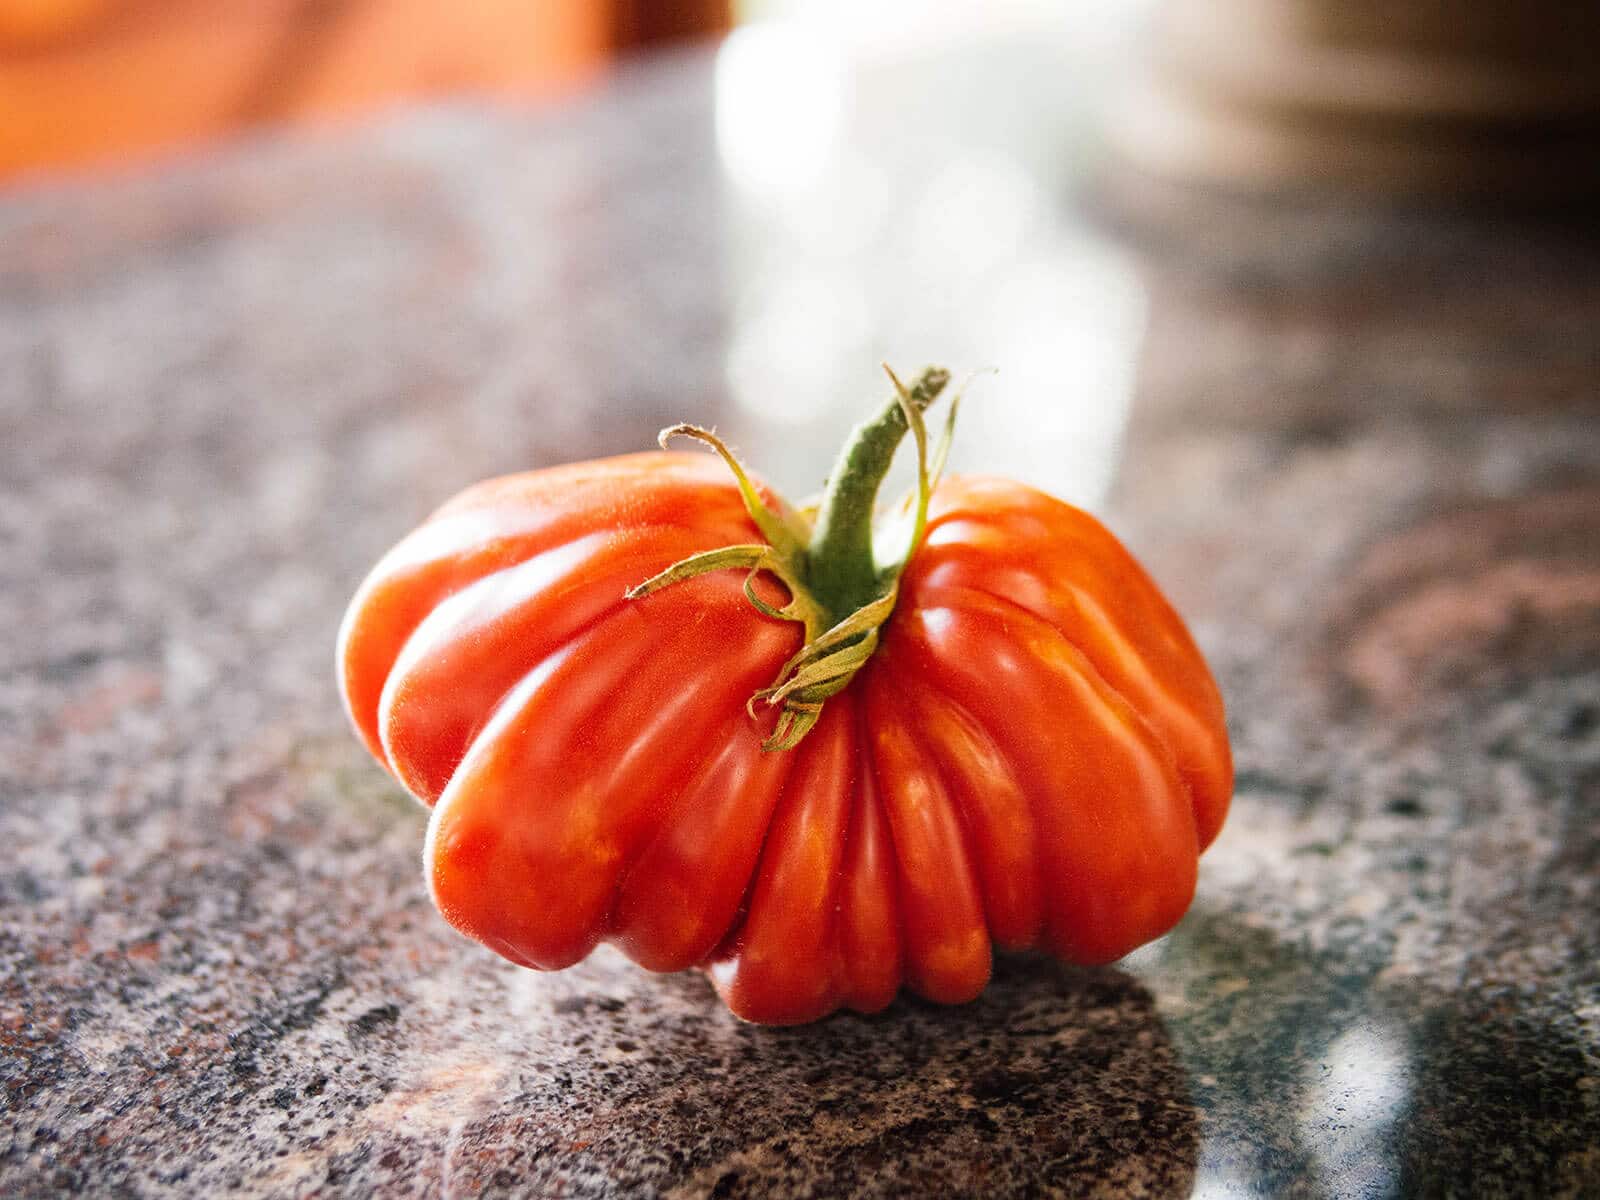 A fully ripe red tomato with mature seeds inside